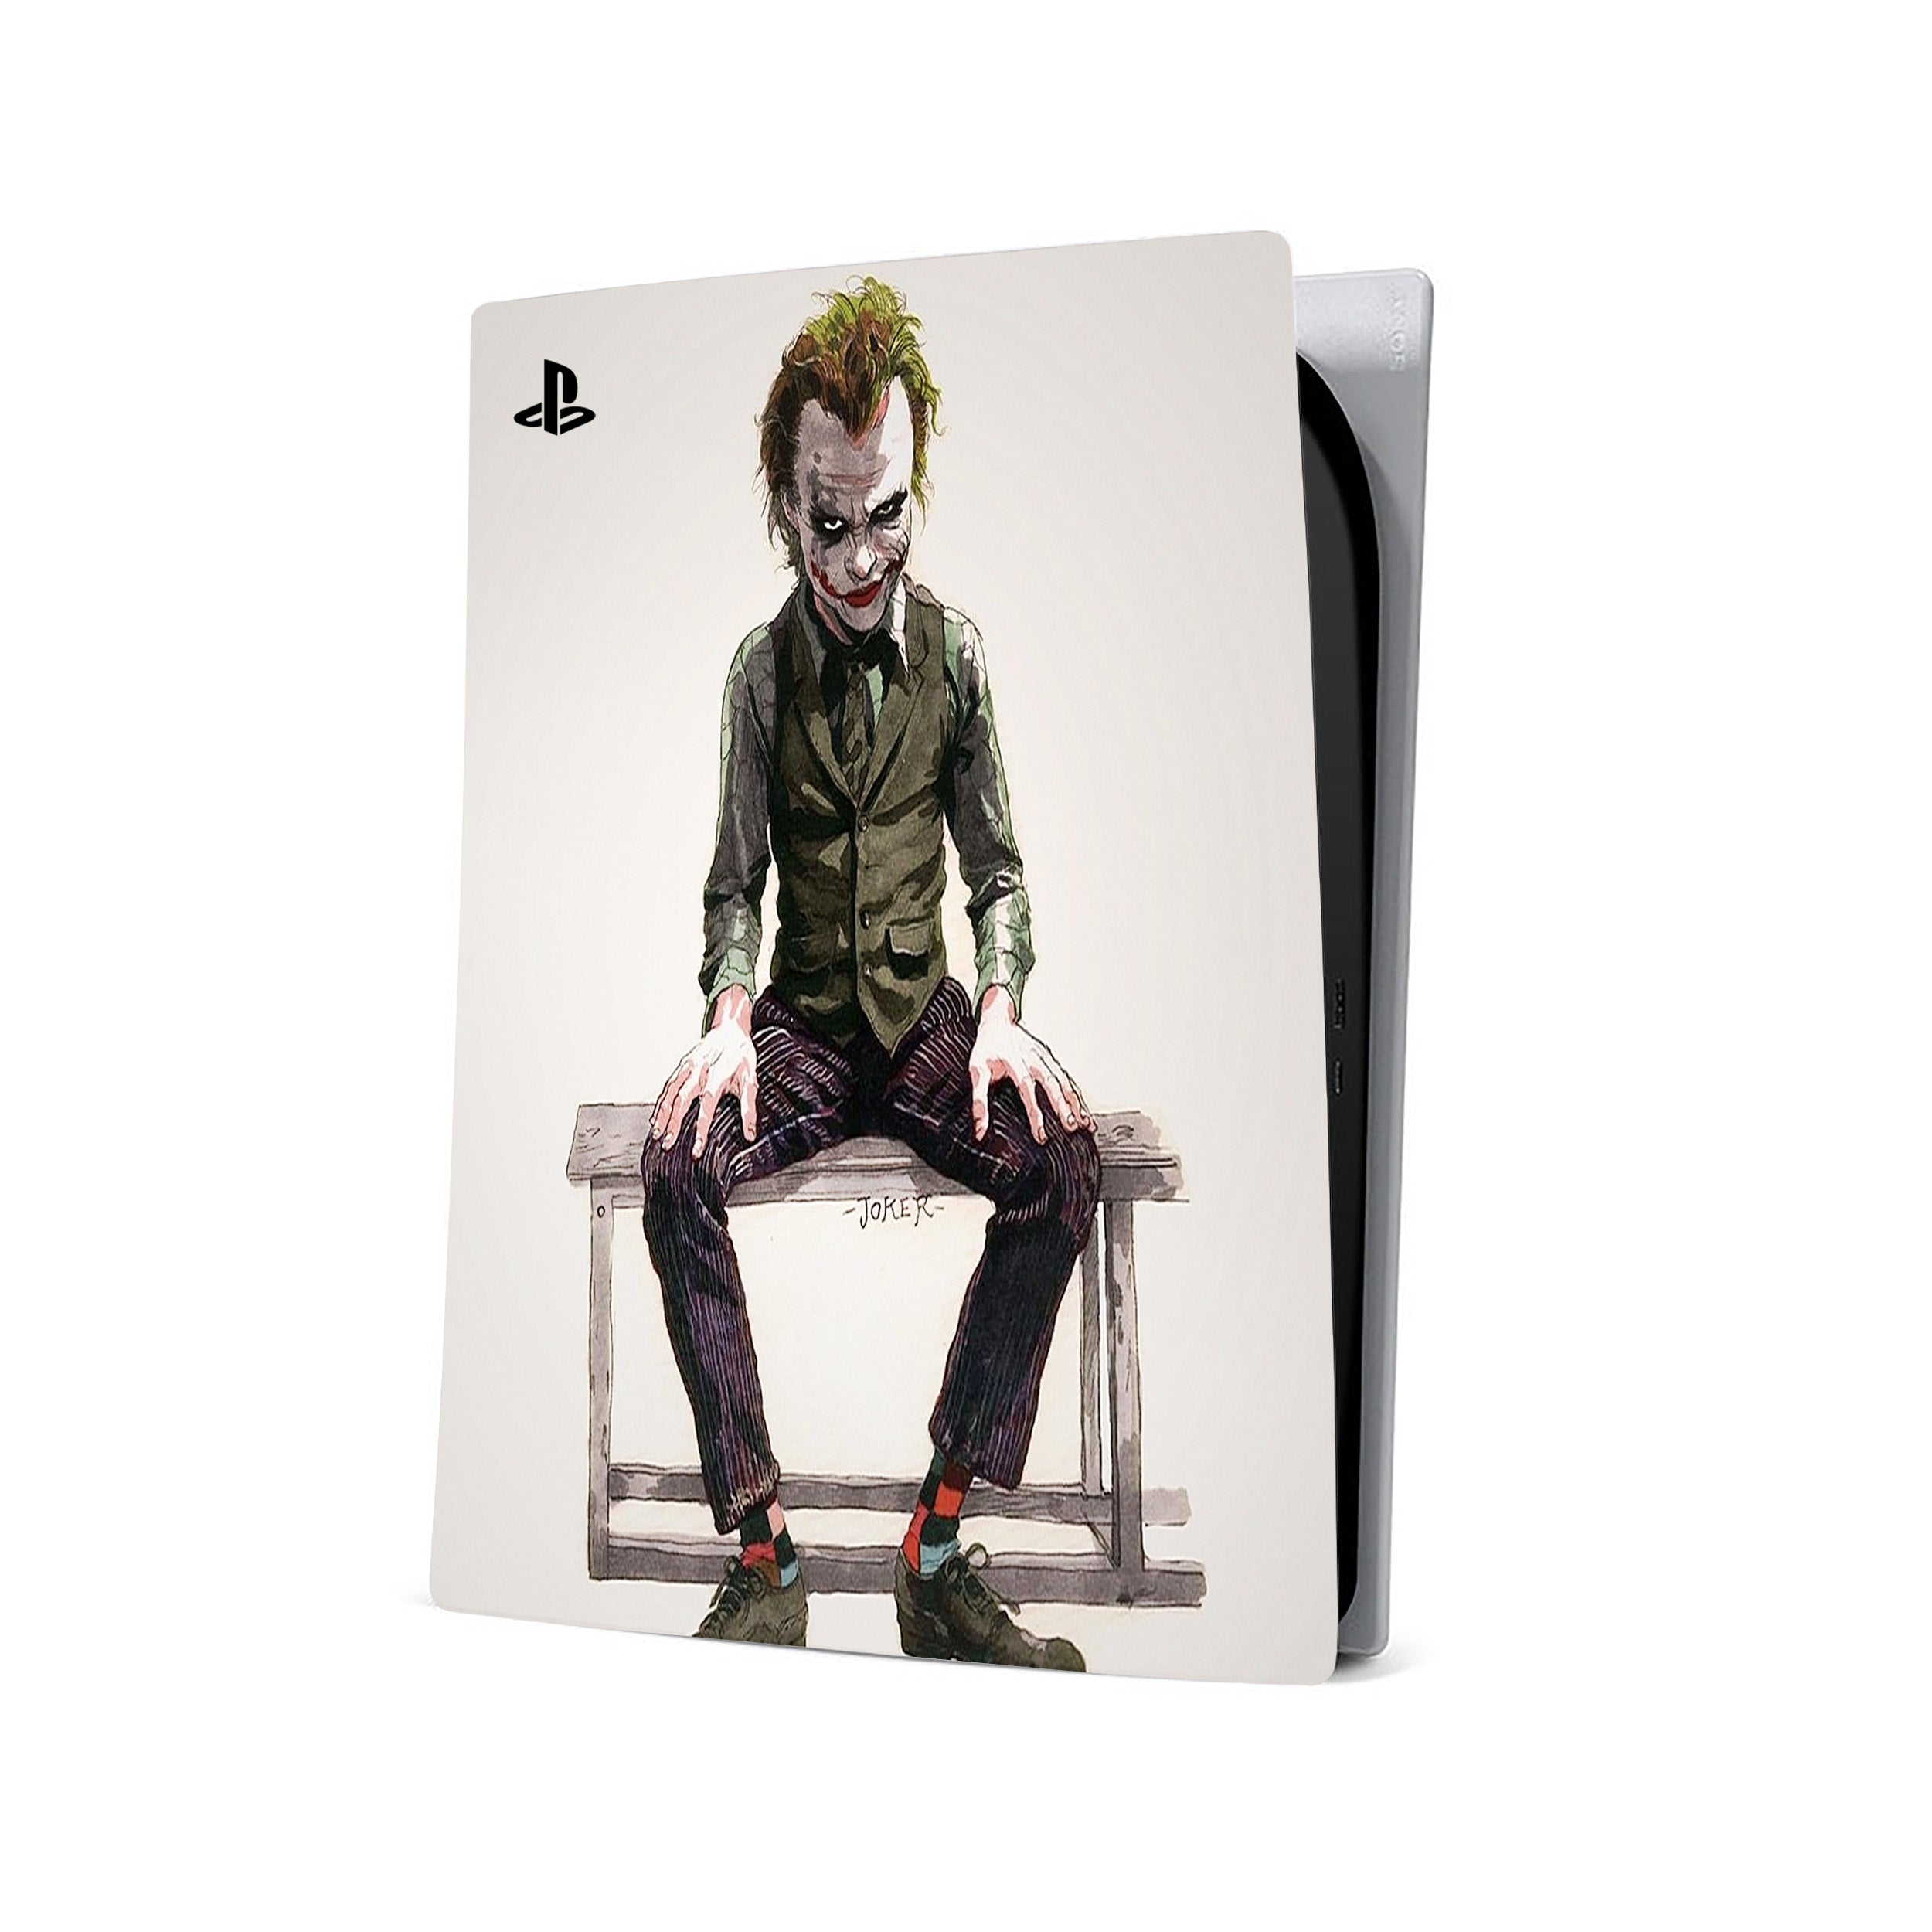 A video game skin featuring a DC Joker design for the PS5.